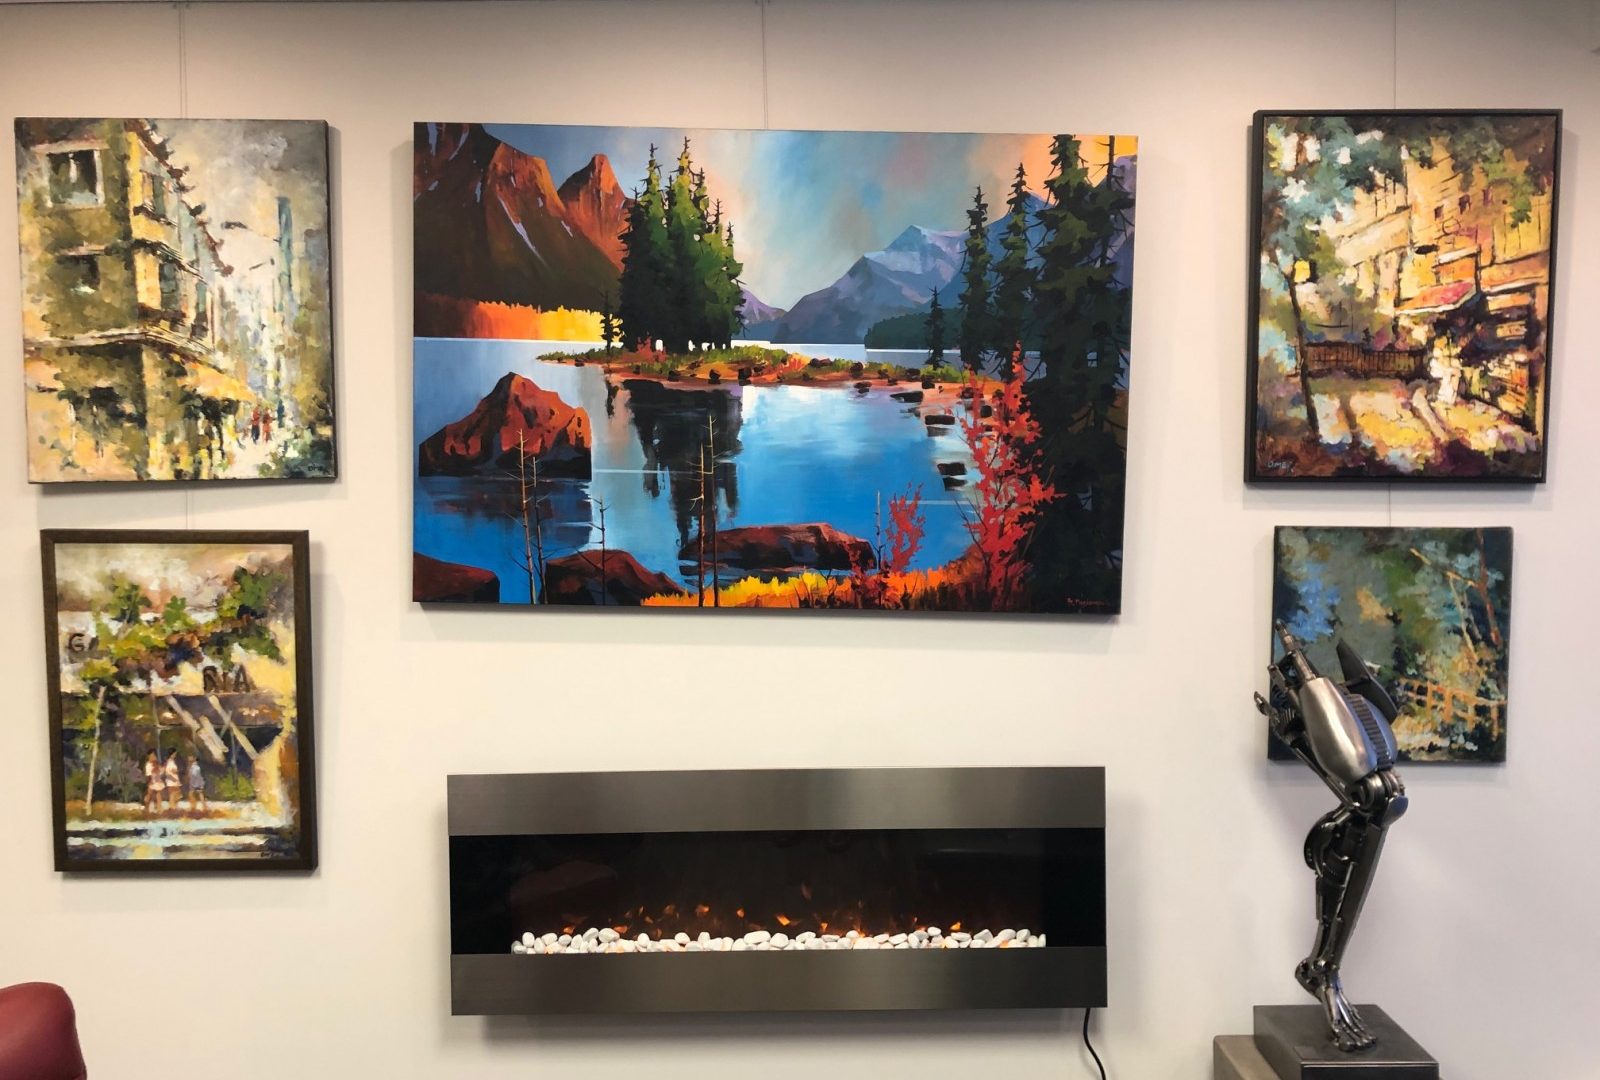 Grant Berg Gallery - Five pieces of artwork with a focus on a Mountain Landscape